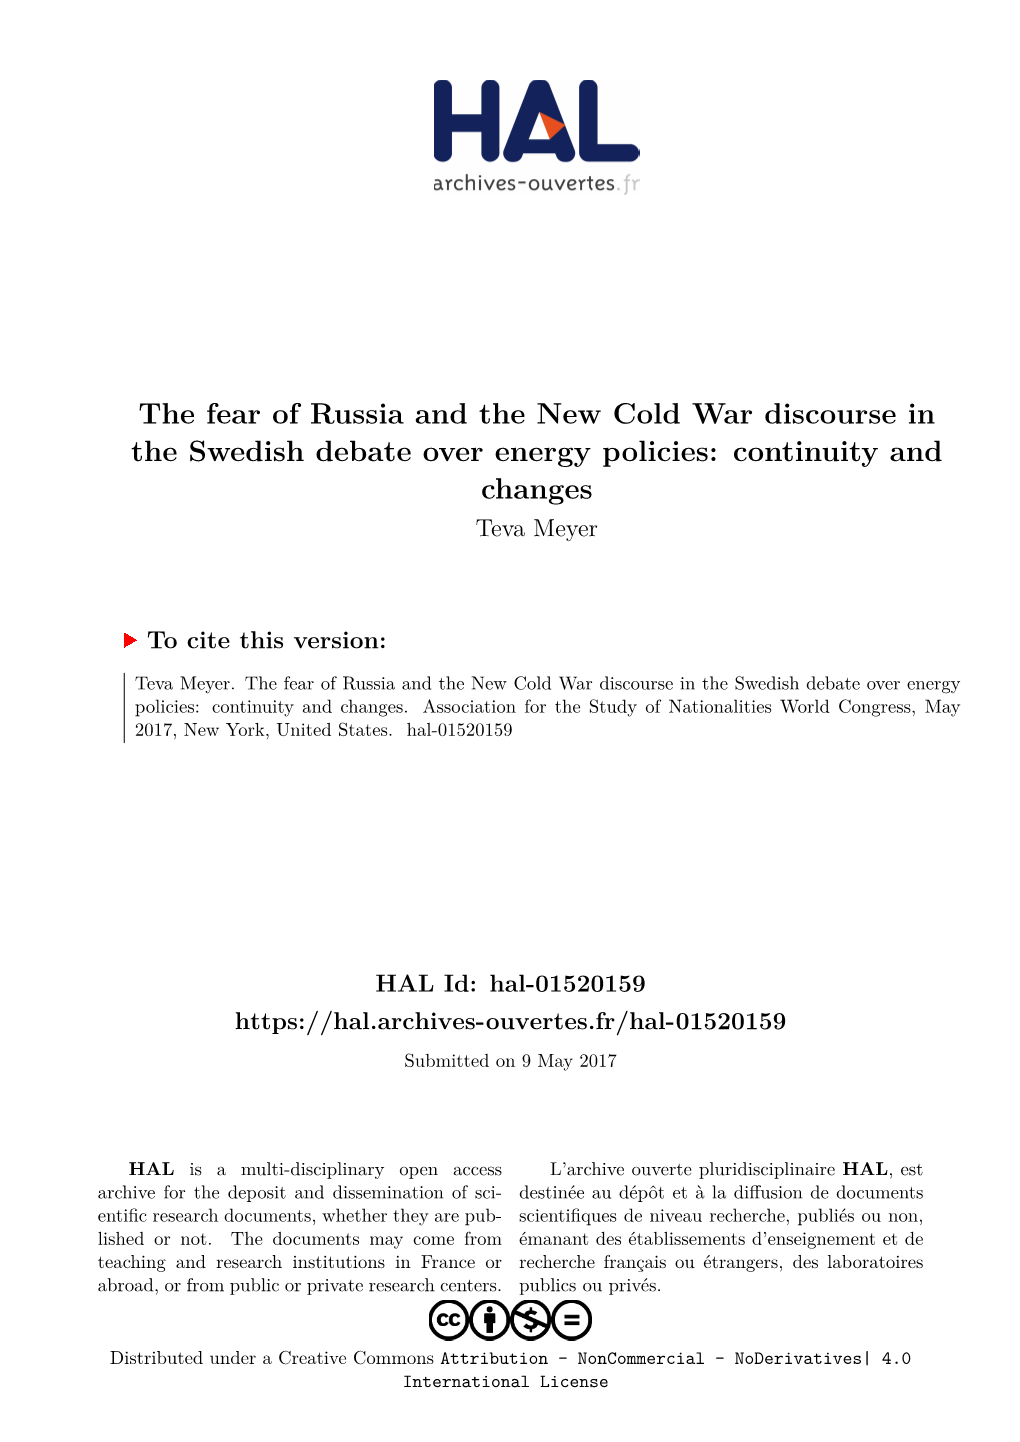 The Fear of Russia and the New Cold War Discourse in the Swedish Debate Over Energy Policies: Continuity and Changes Teva Meyer